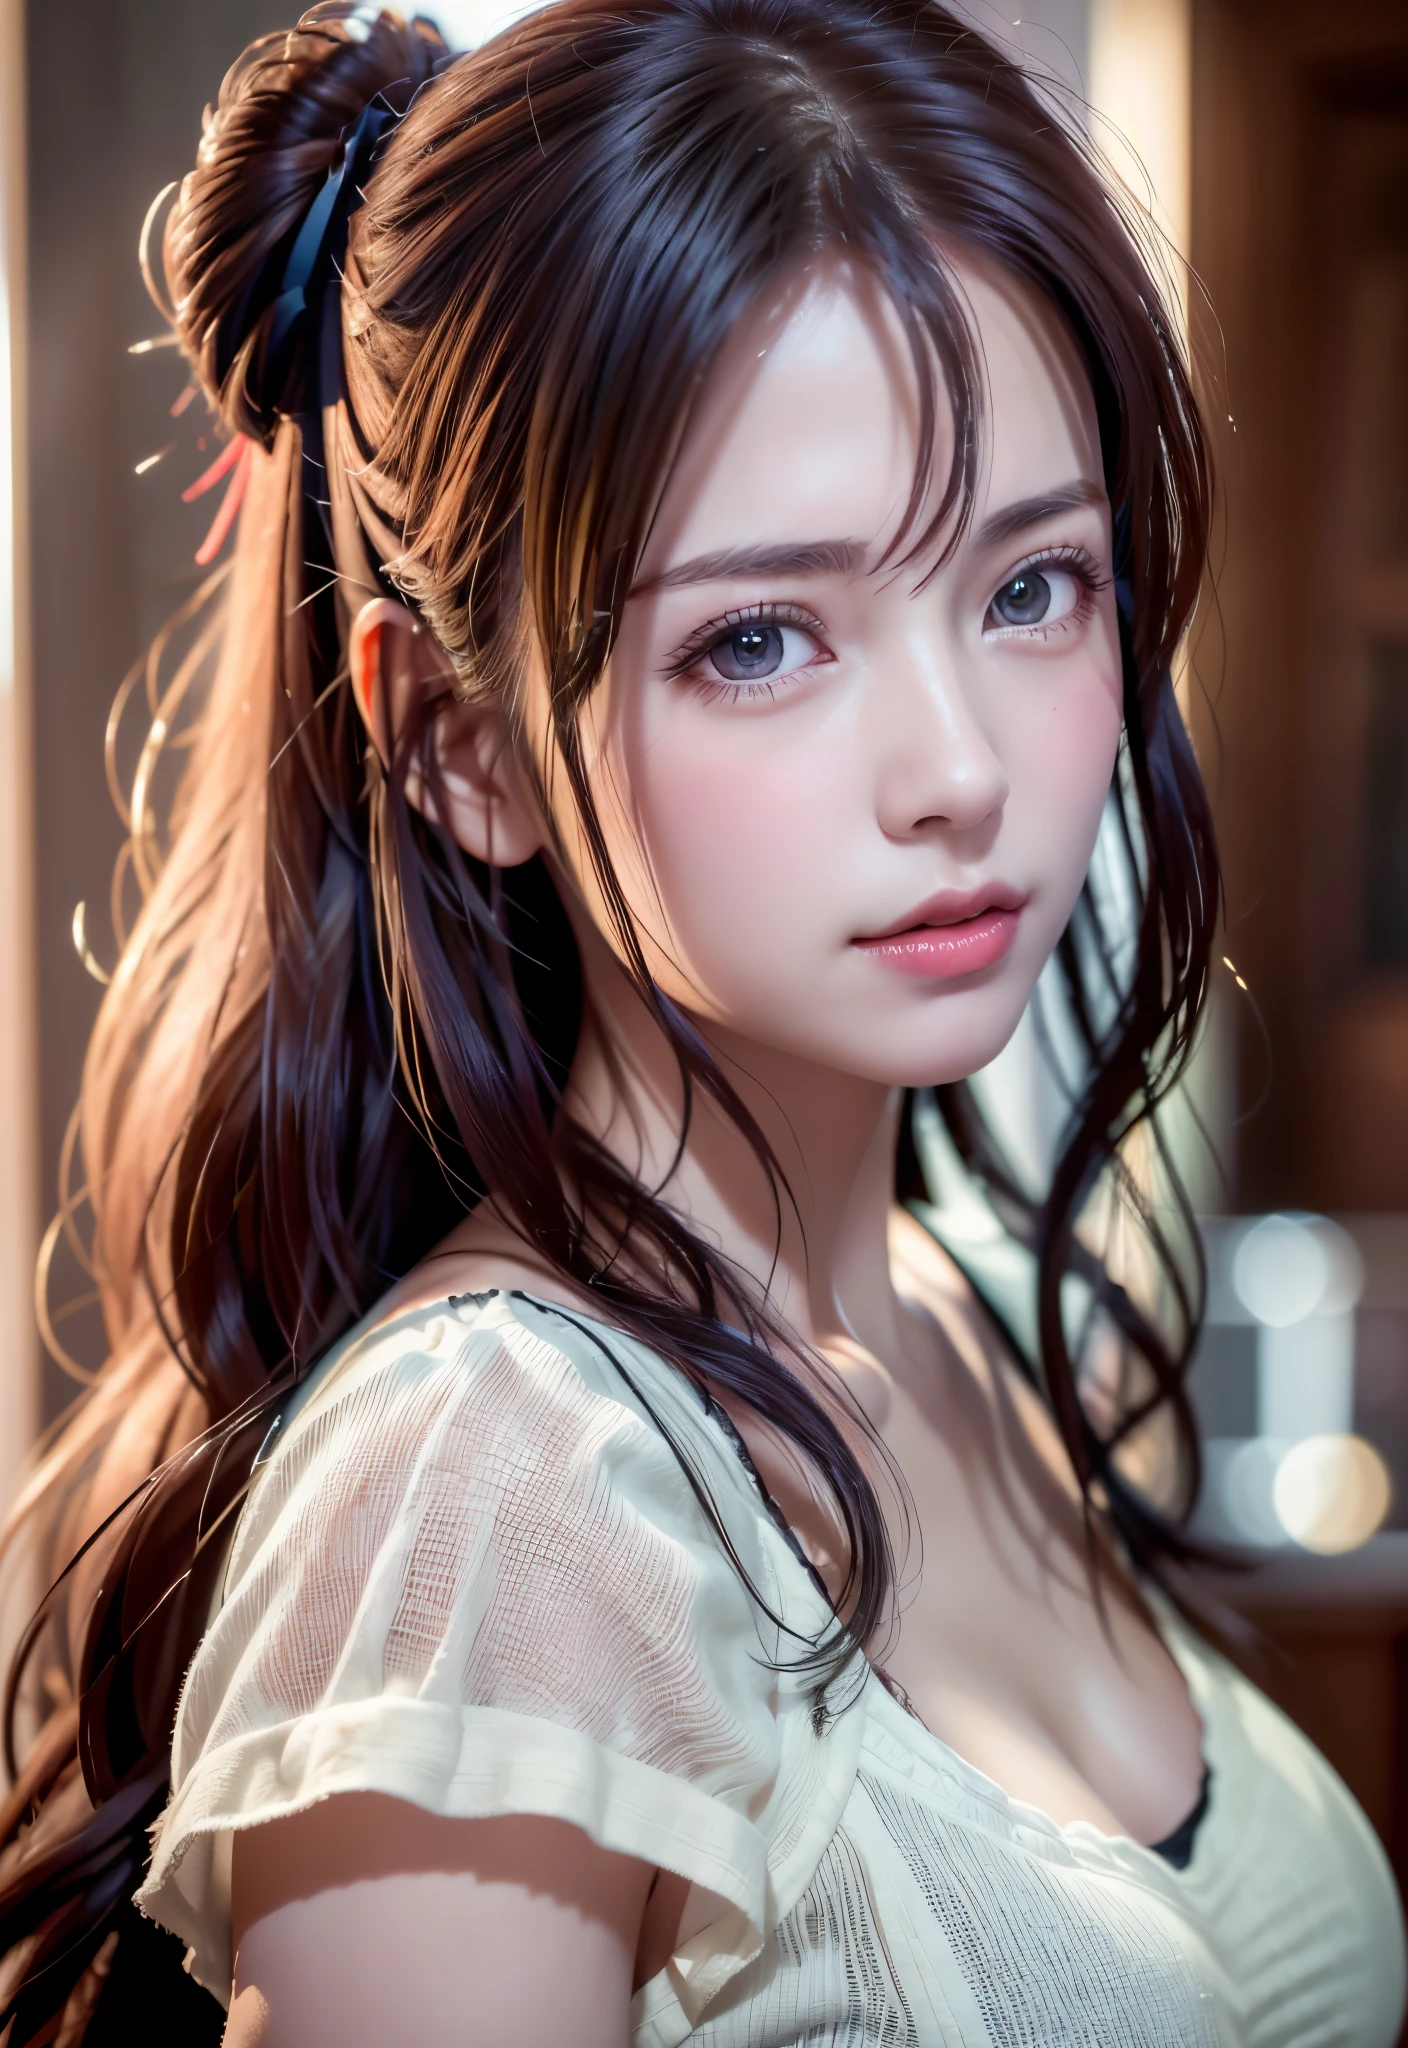 8K, of the highest quality, masutepiece:1.2), (Realistic, Photorealsitic:1.37), of the highest quality, masutepiece, Beautiful young woman, Pensive expression, Gentle eyes, Cute Nightgown、full of shyness、Hair tied back, Messy mood, Cinematic background,  Light skin tone